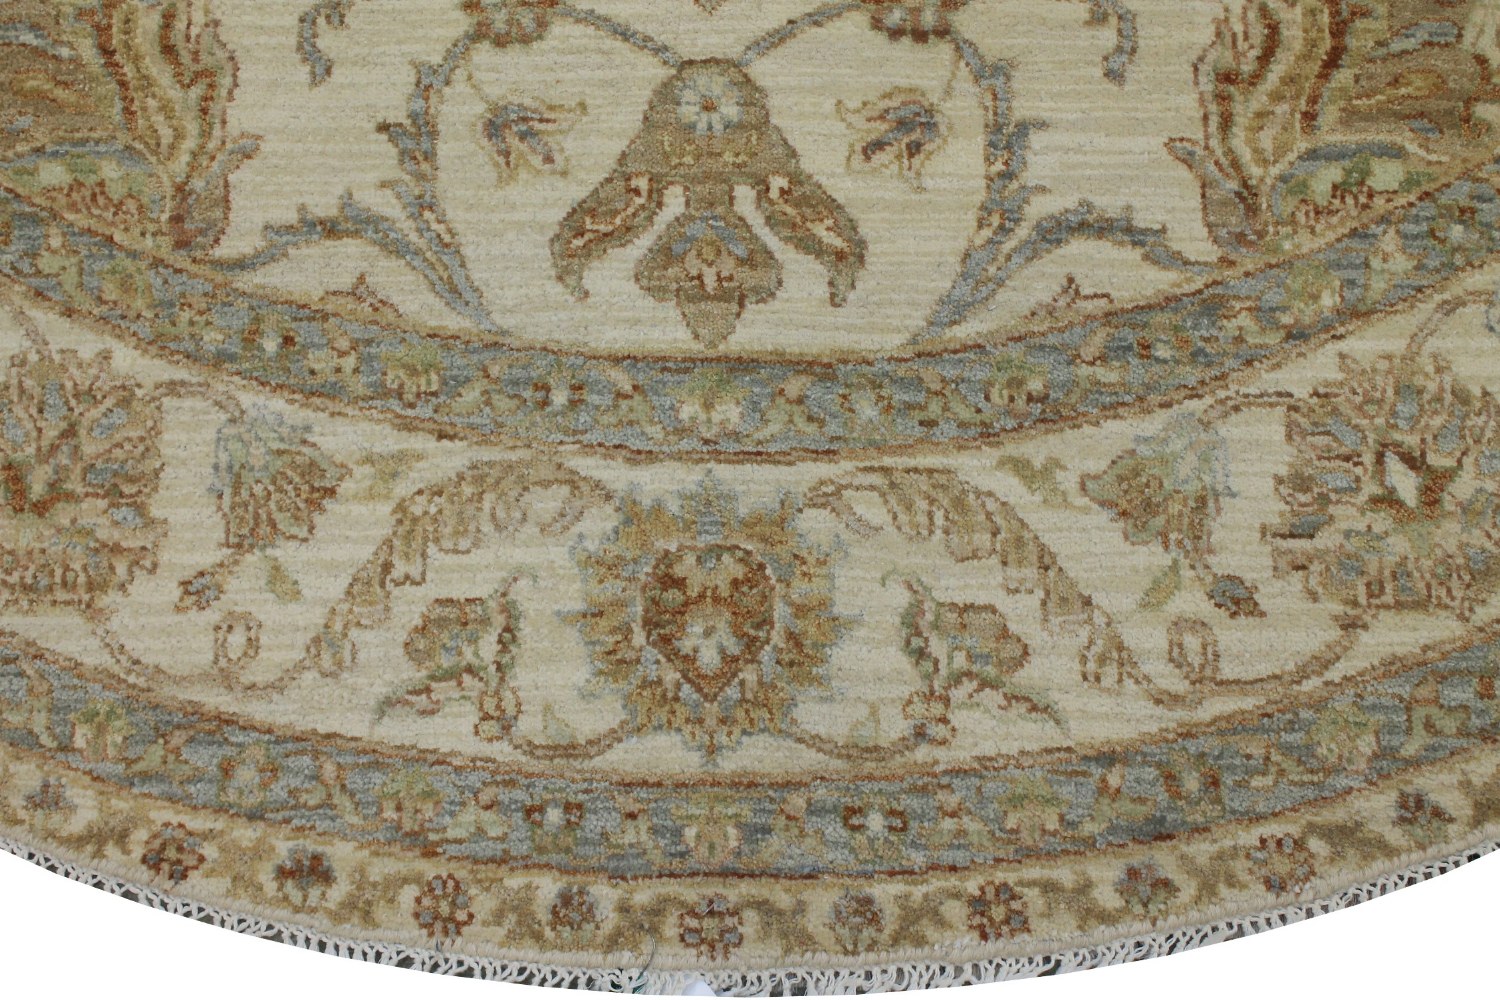 8 Round & Square Traditional Hand Knotted Wool Area Rug - MR20425